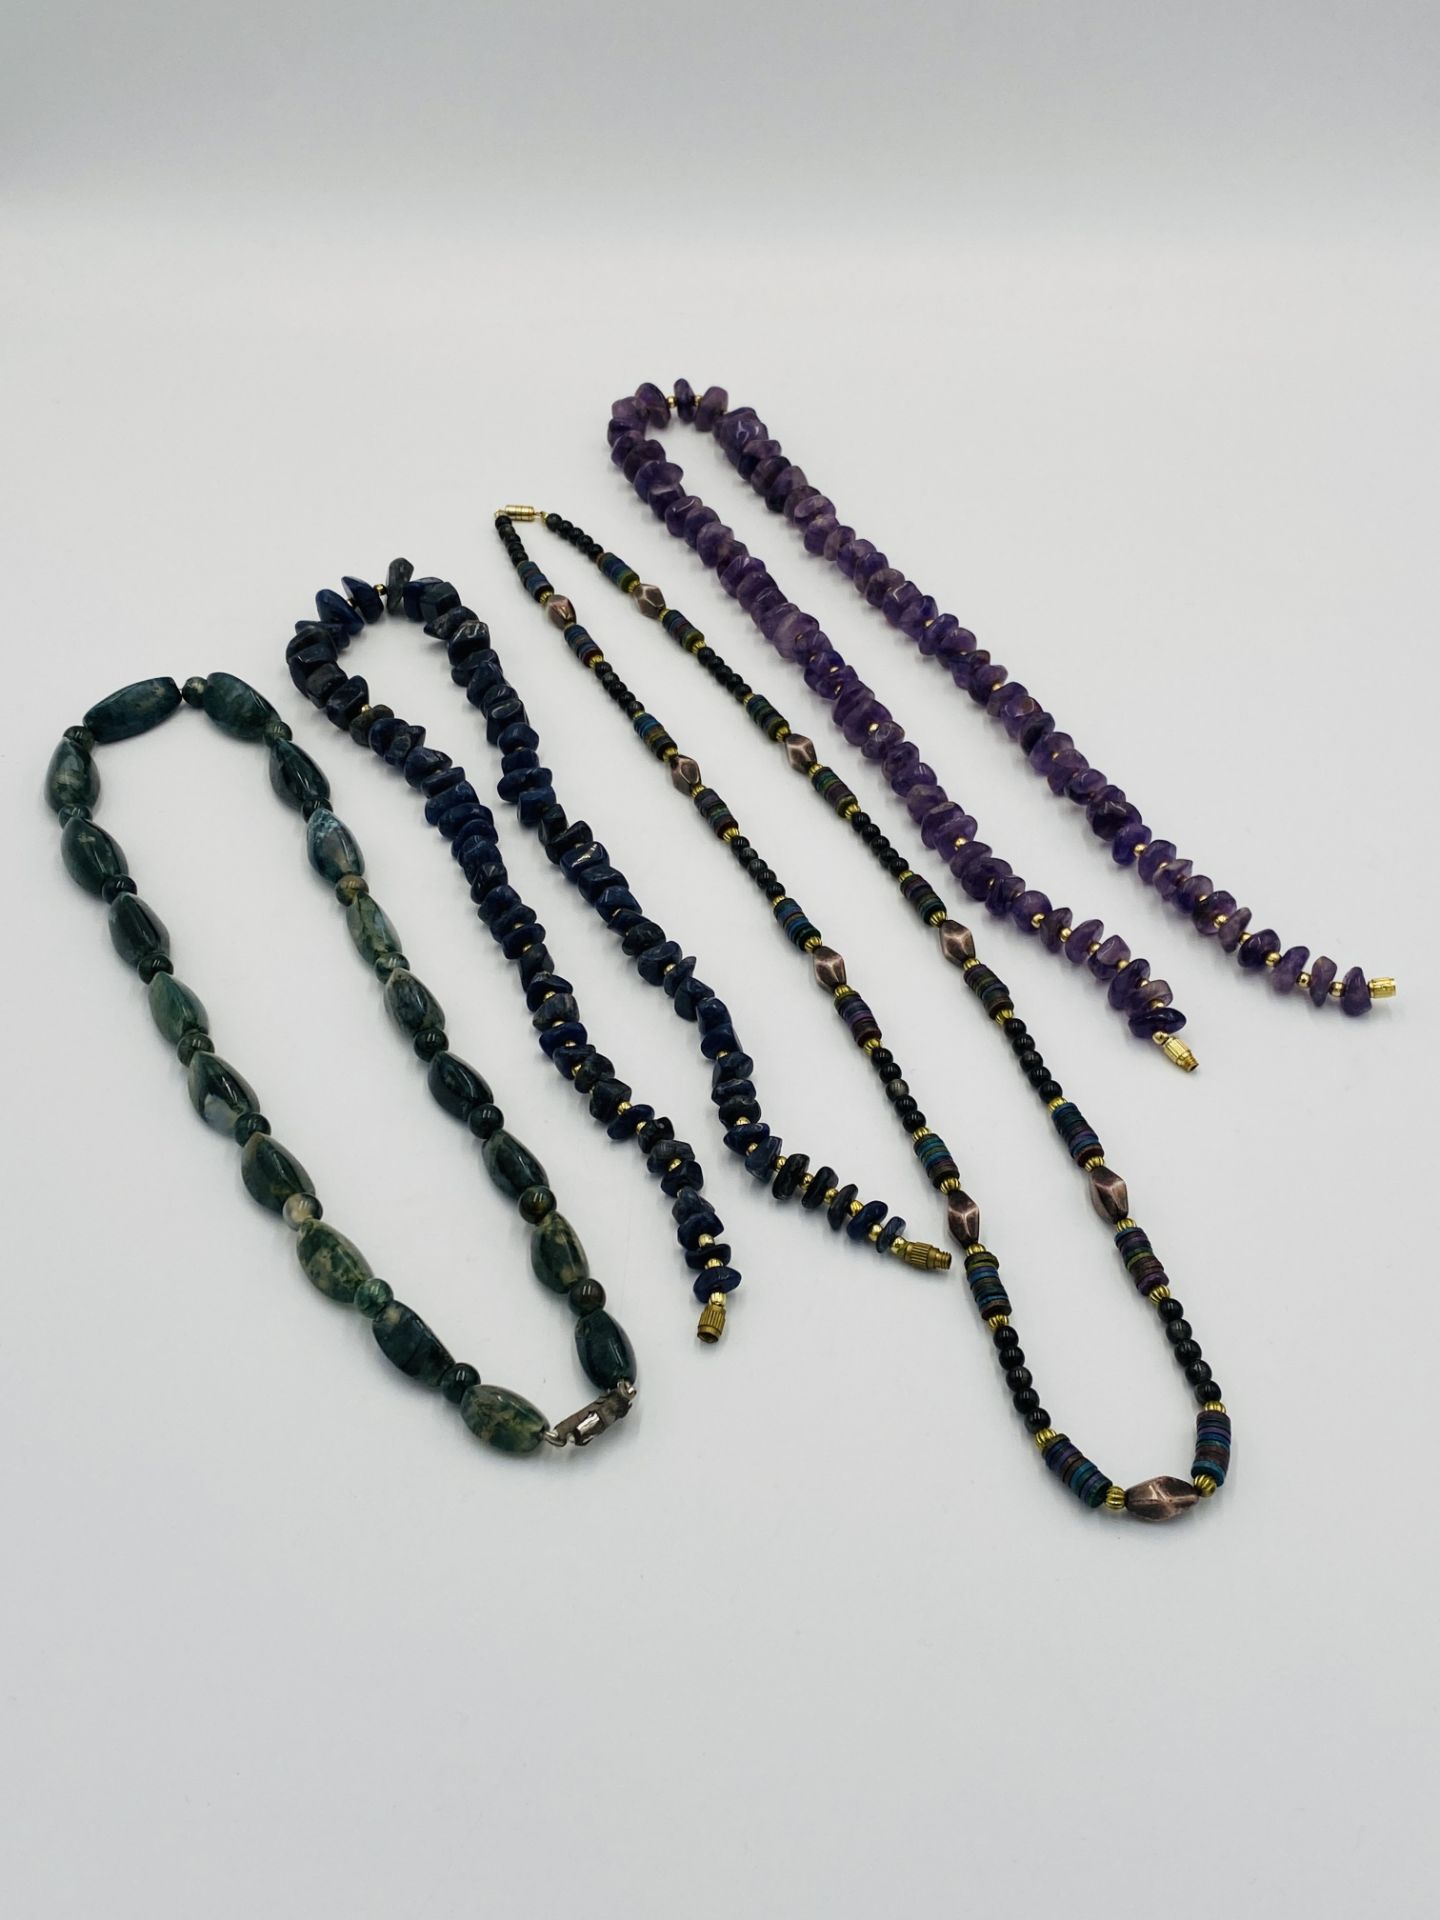 Four agate bead necklaces - Image 2 of 6